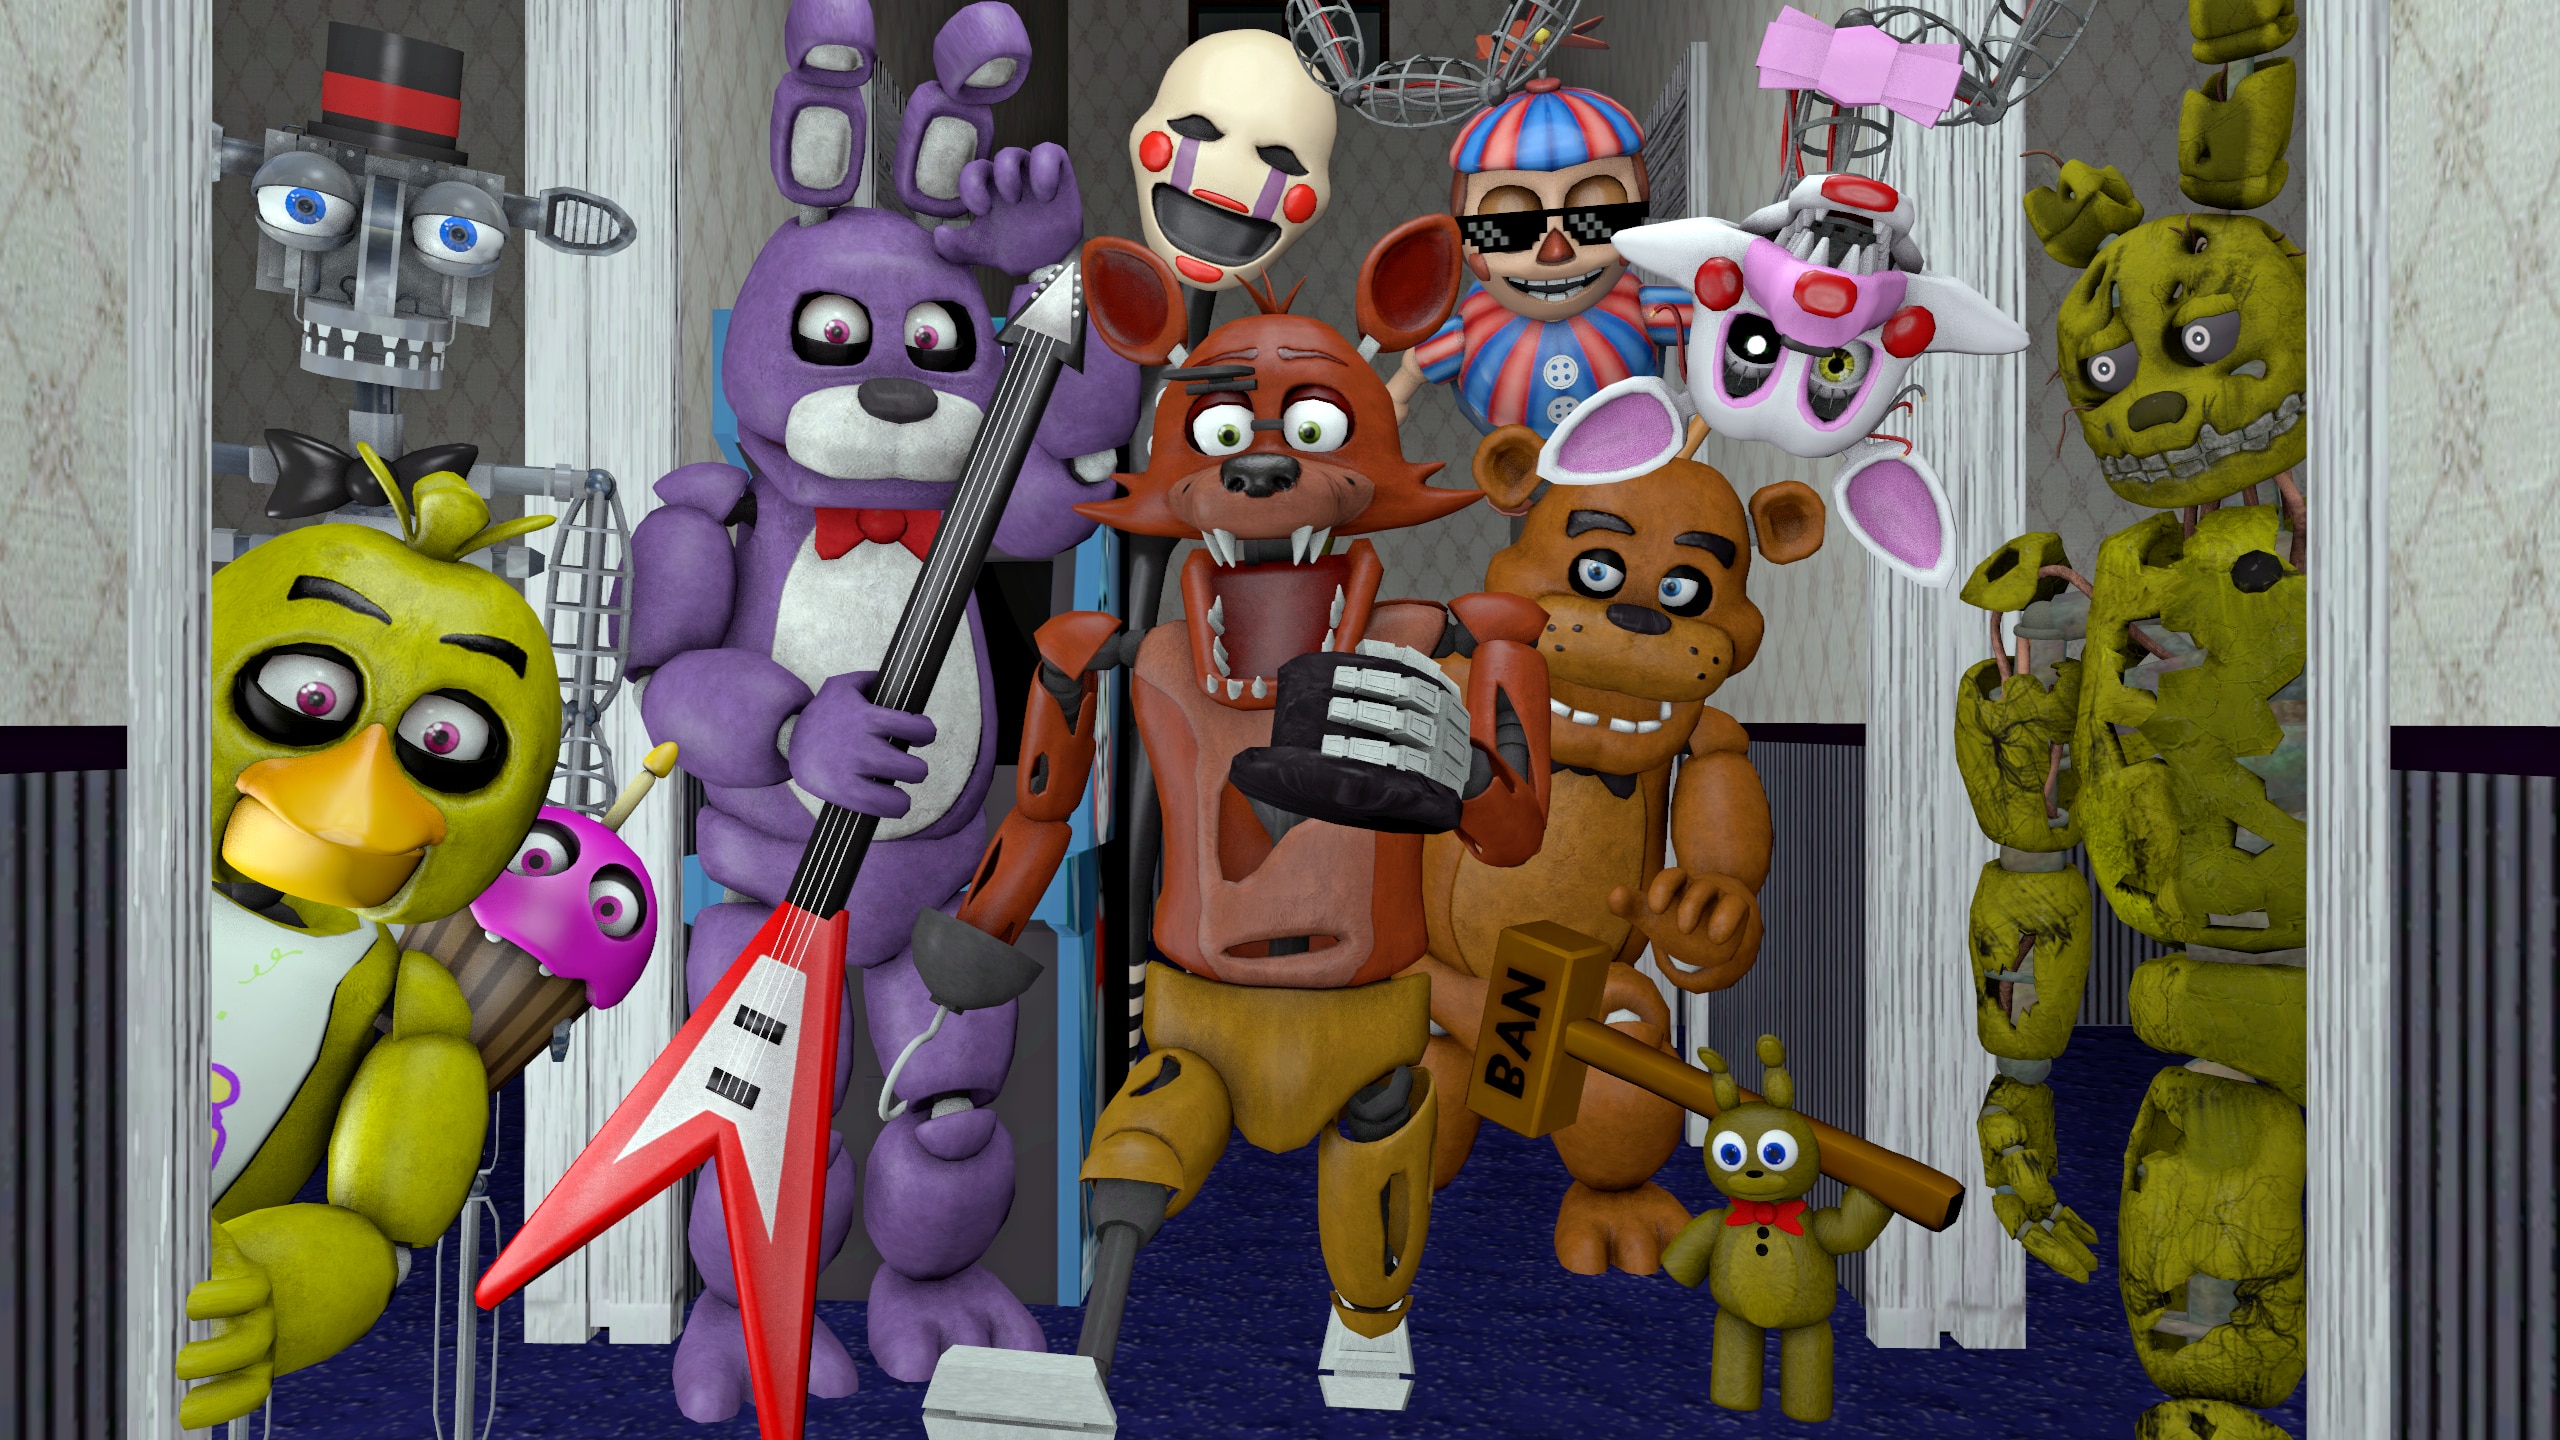 Steam Workshop::Five Nights at Freddy's Security Breach Vanny